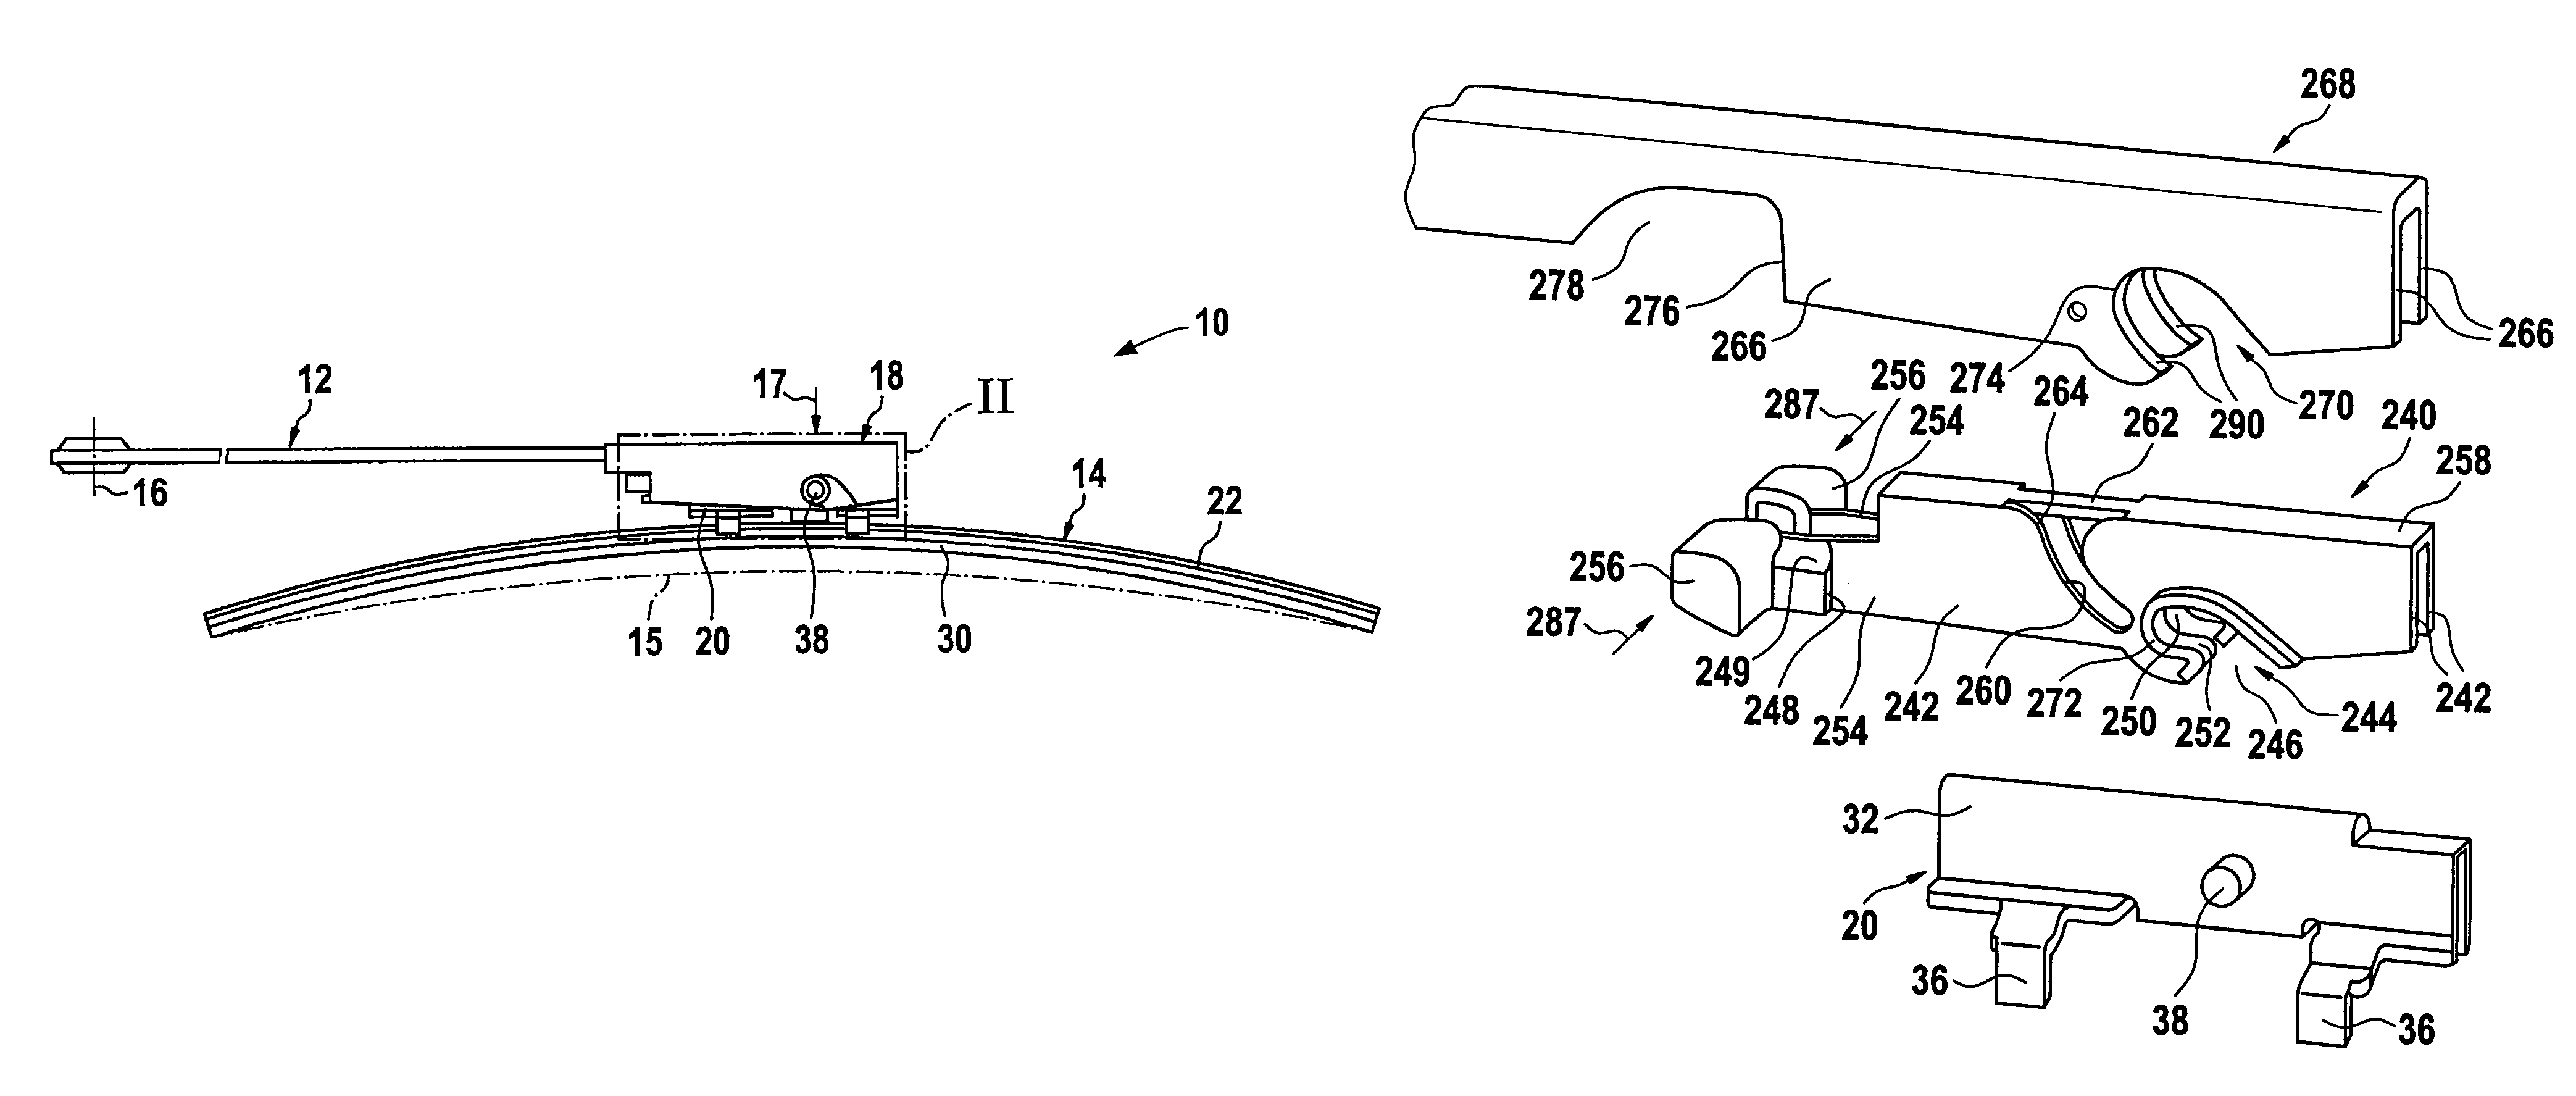 Wiper lever comprising a wiper arm and a wiper blade which is connected to the same in an articulated manner